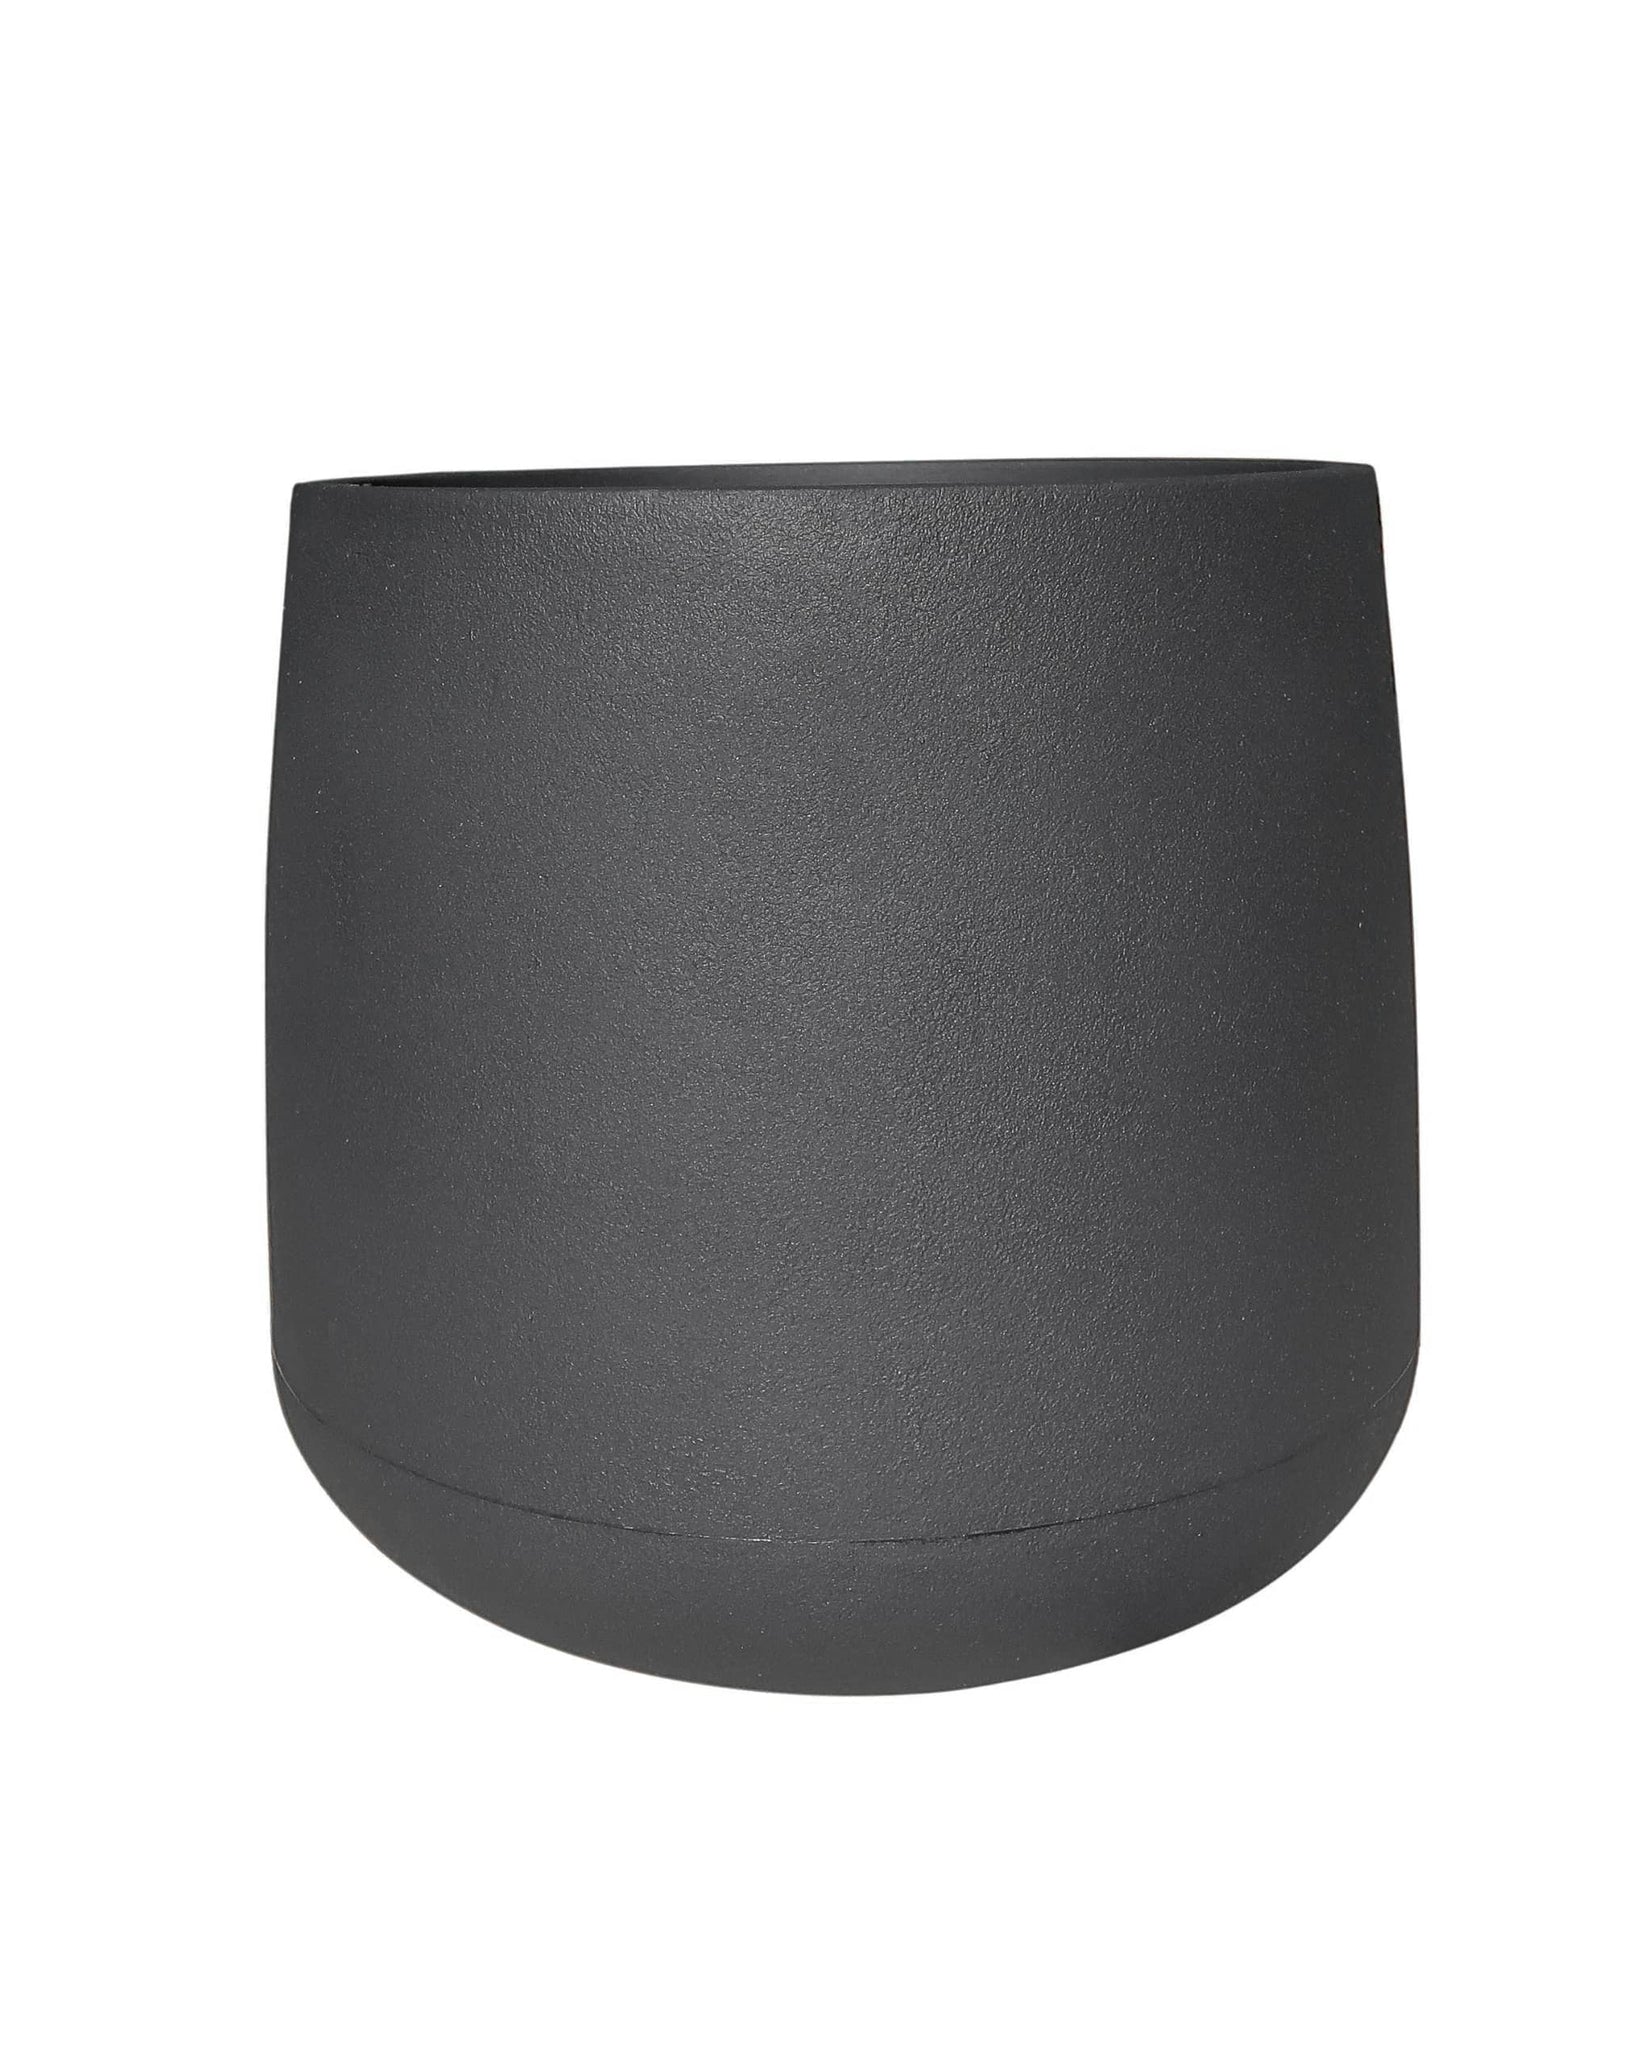 Side view of the medium Bios plant pot showing the beautiful textured finish and clean straight upright lines of the pot in colour lead (black), Florastyle by Hingham.